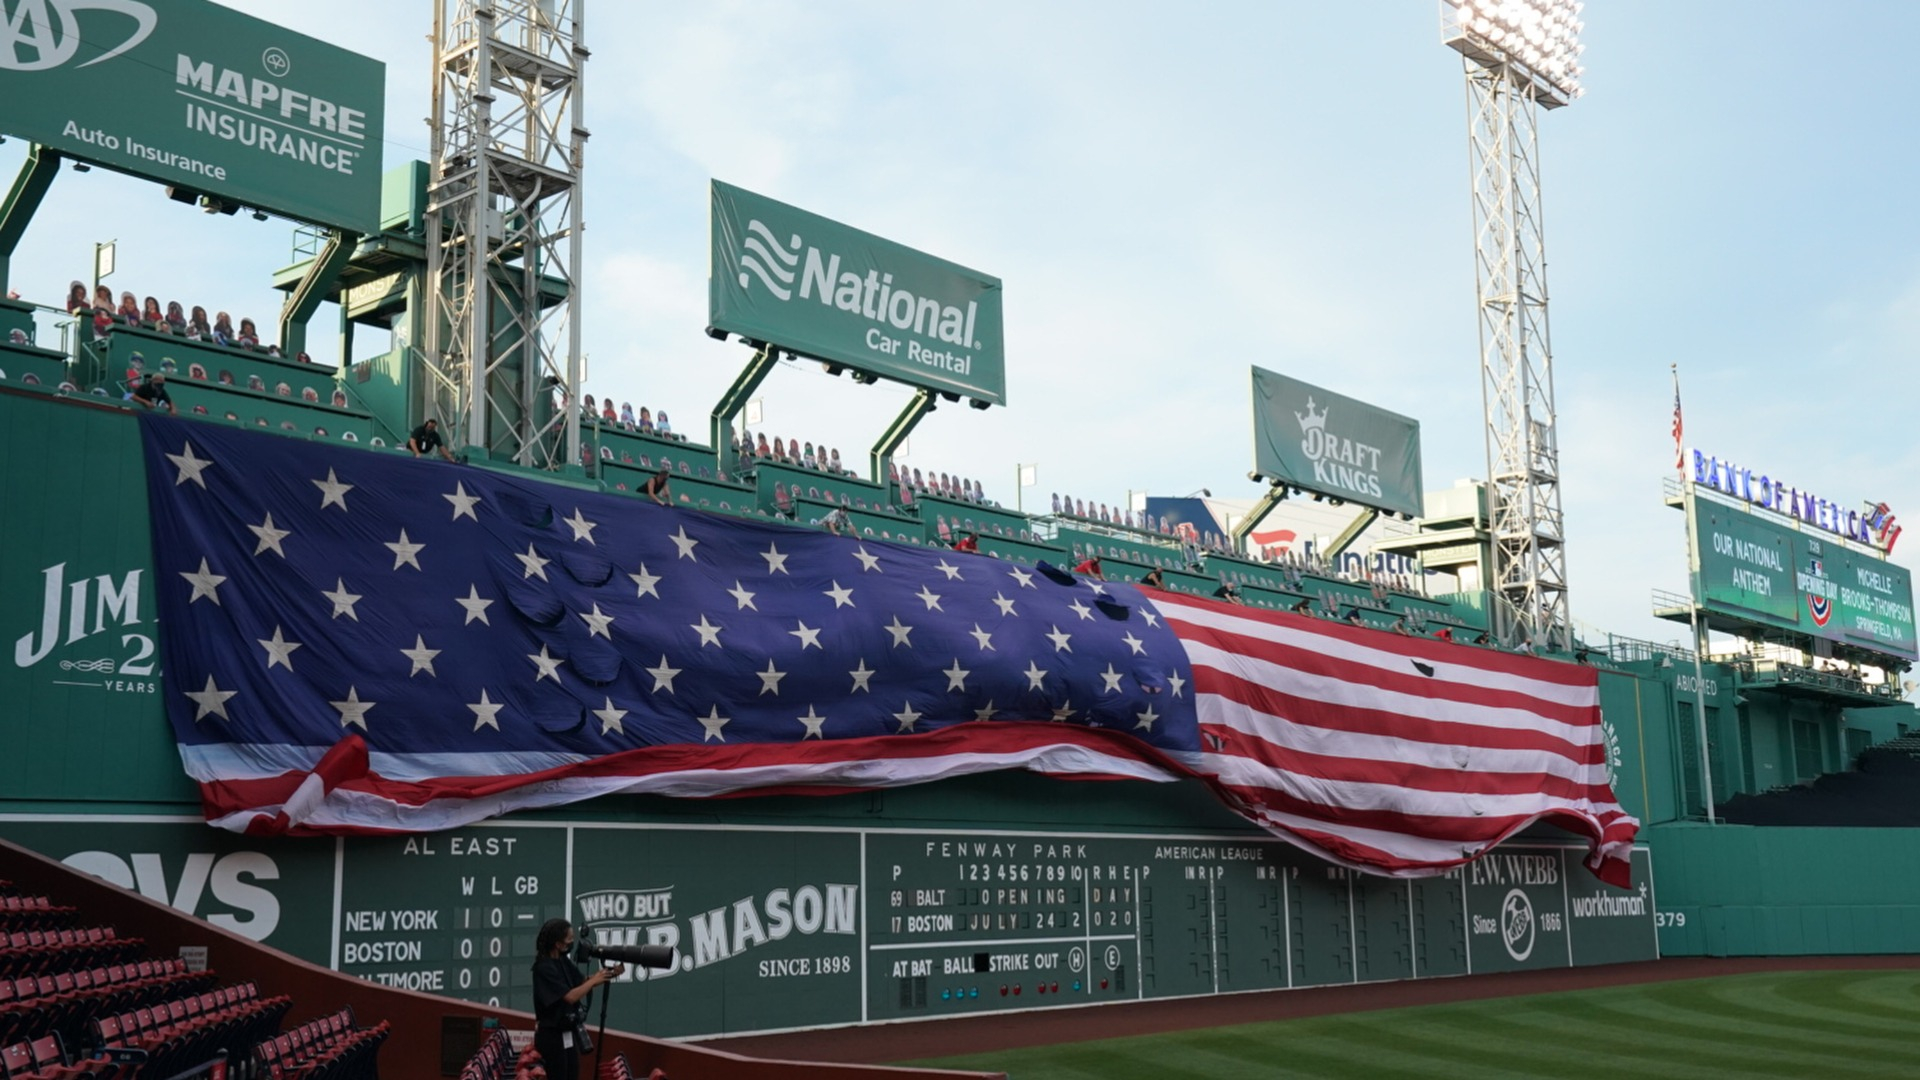 Red Sox Foundation Hosts 14th Annual ‘Run To Home Base’ At Fenway
Park